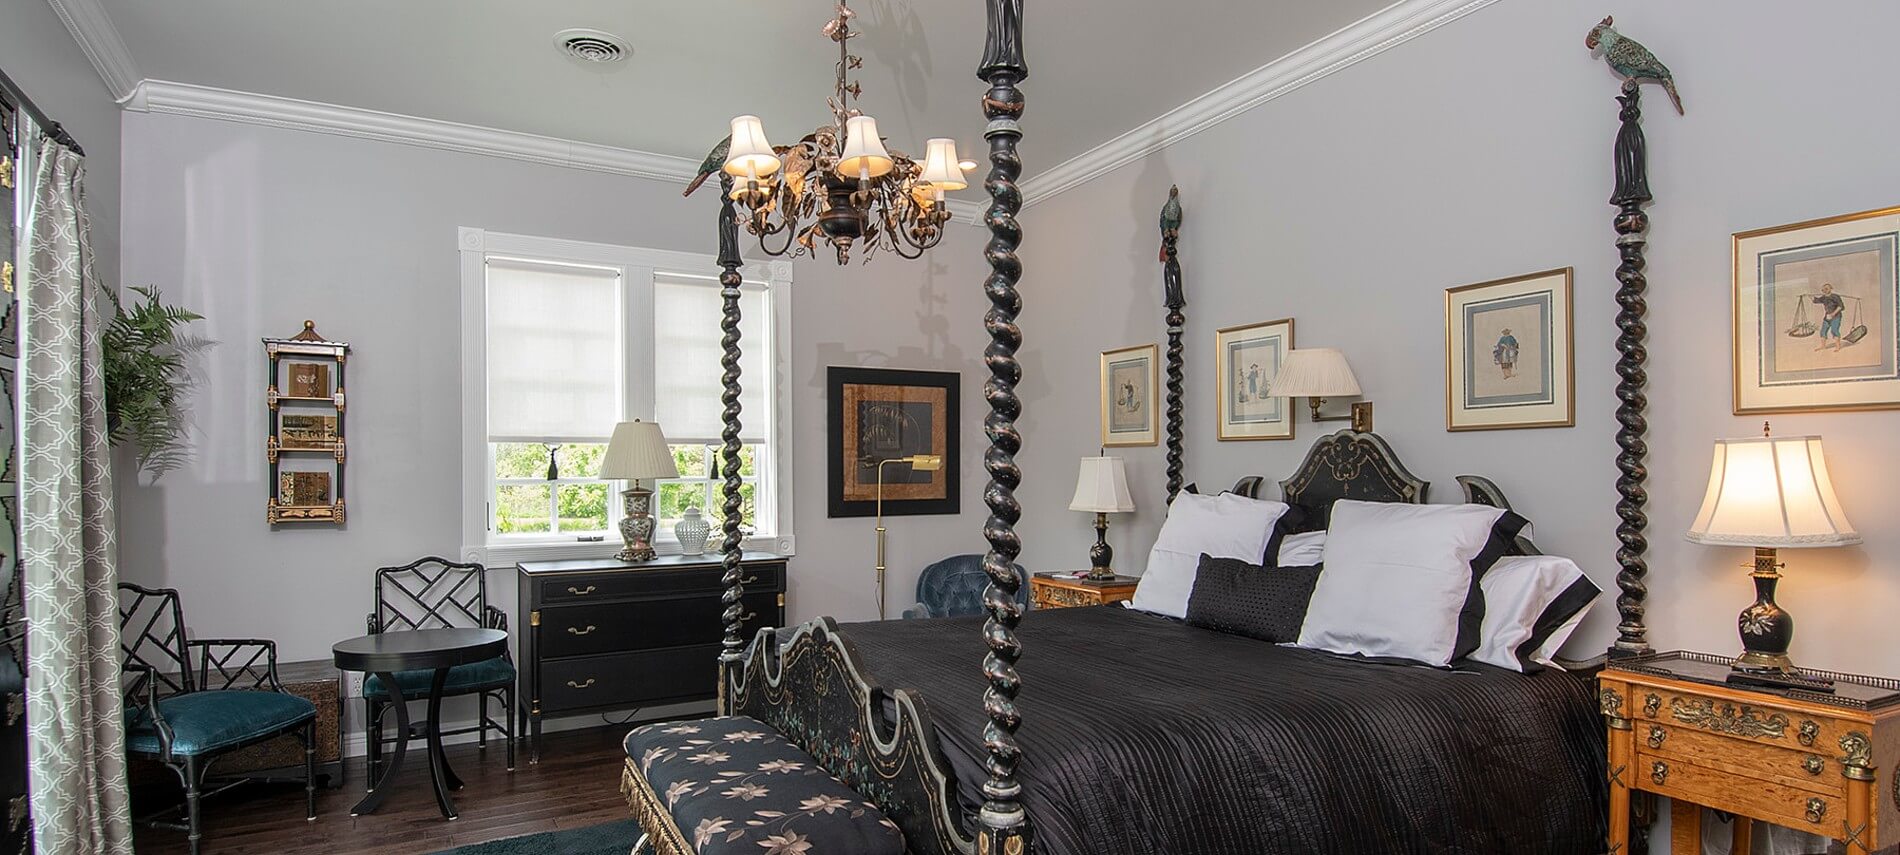 Striking bedroom with unique turned-posts on bed, black bedding and furniture.